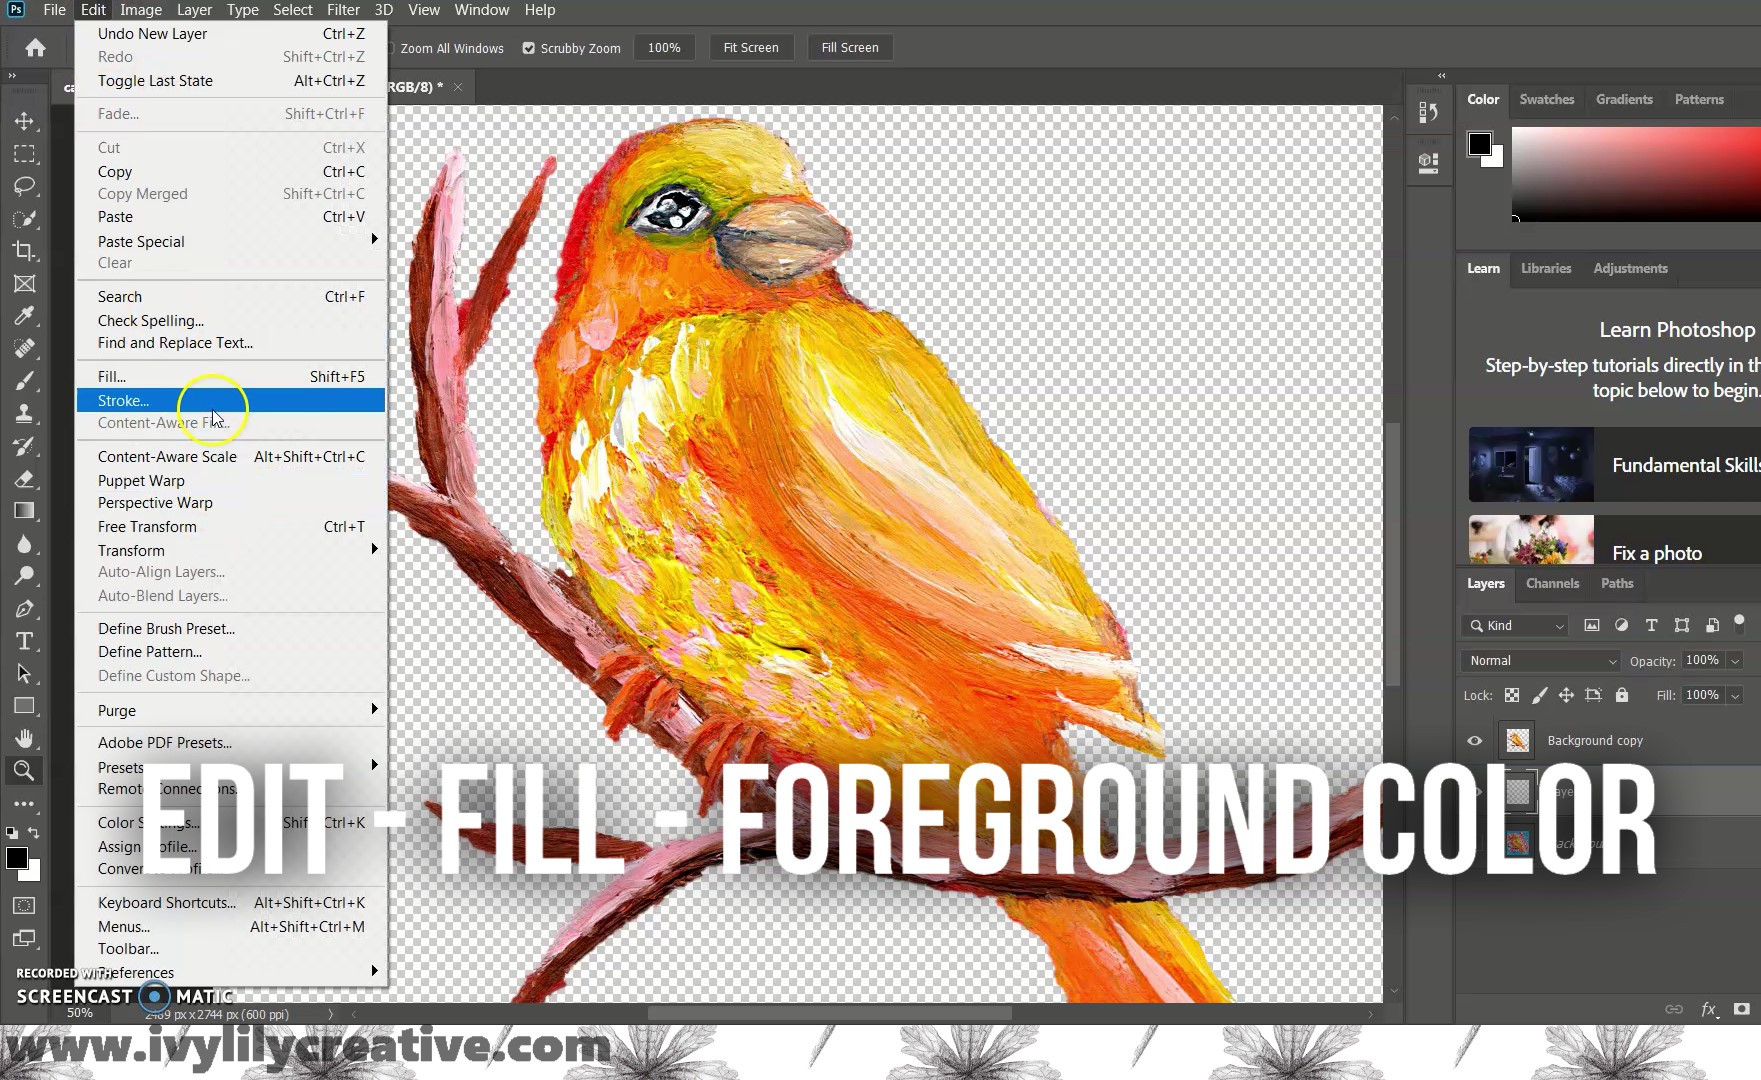 Art:How to get a transparent background using Photo Editor - YPPedia